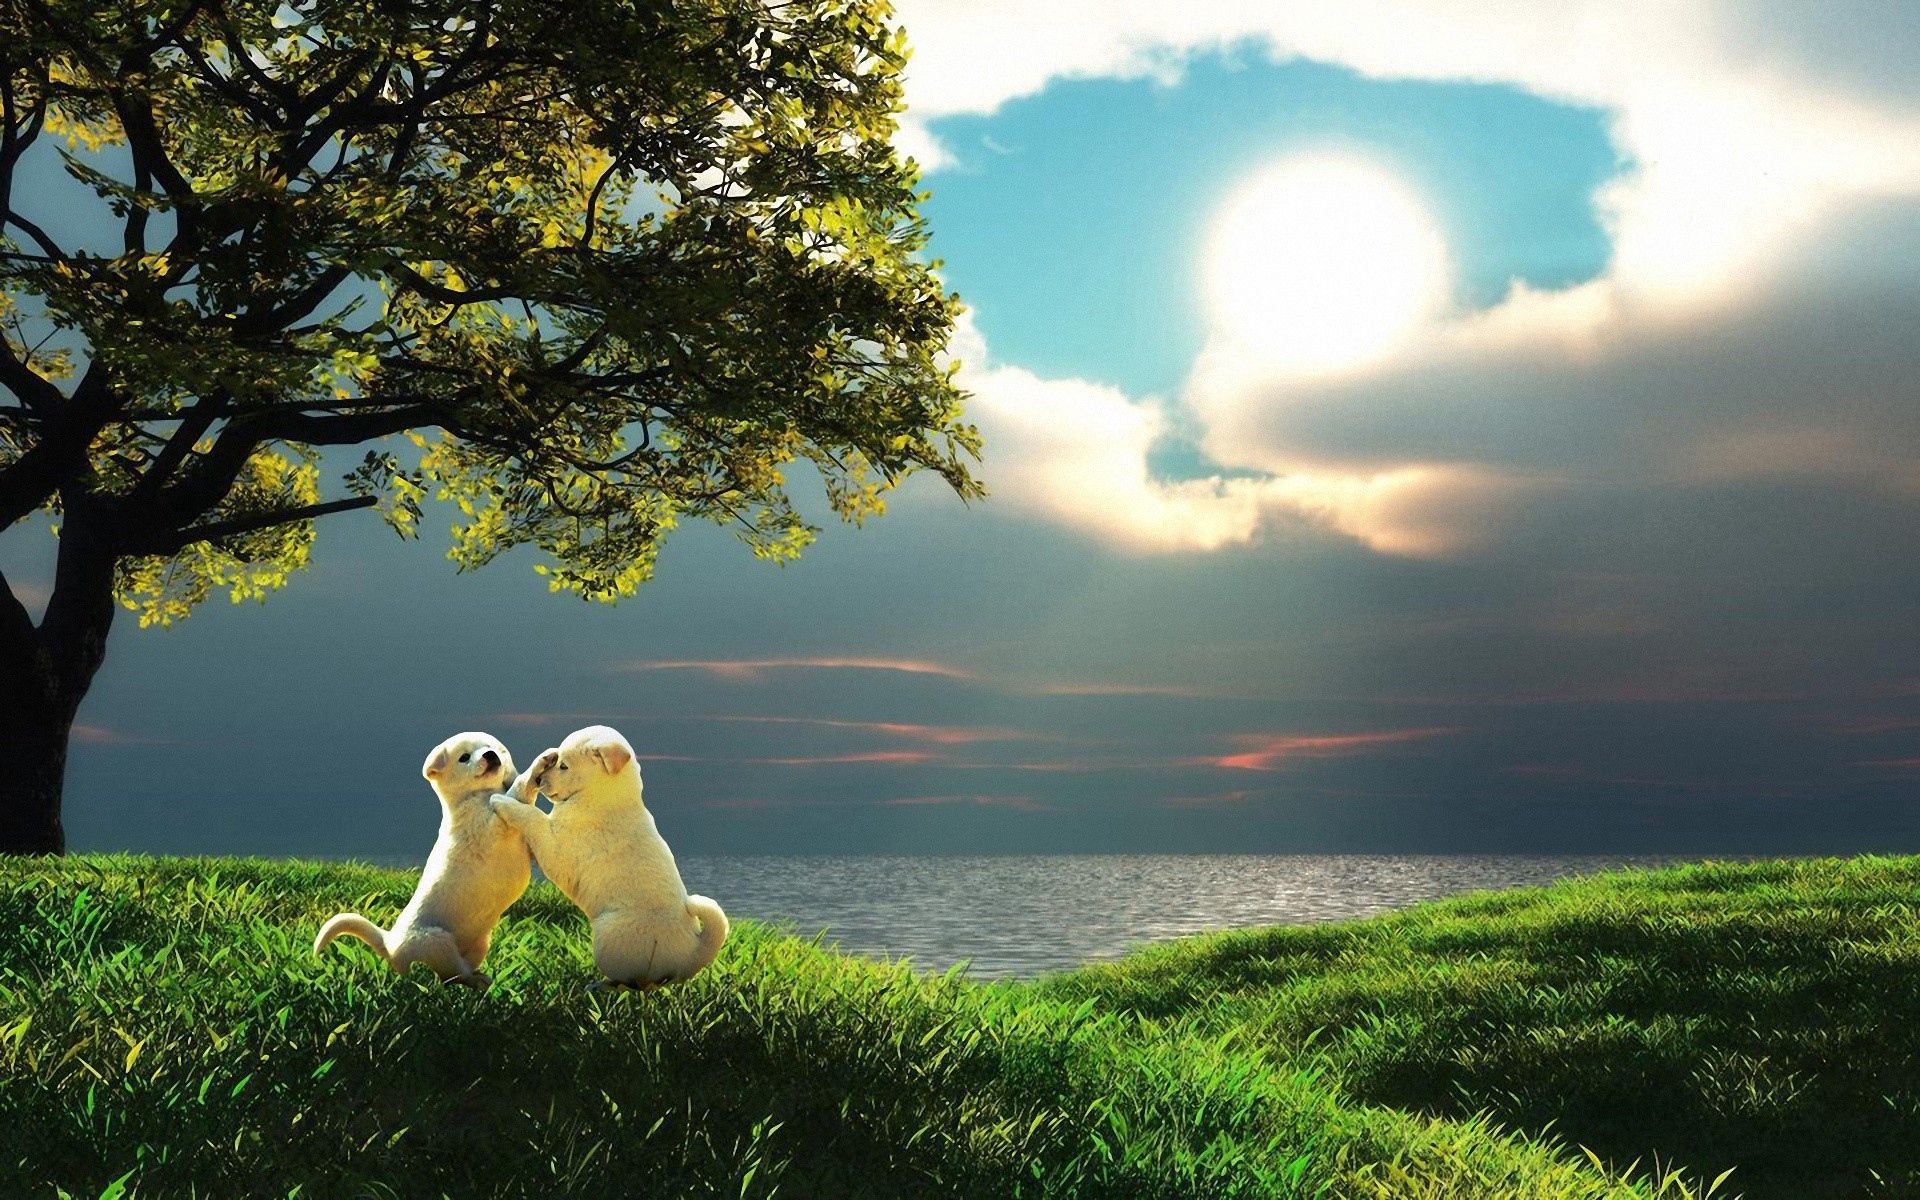 50899 download wallpaper pair, animals, nature, sunset, couple, puppy, play, toddlers, kids screensavers and pictures for free